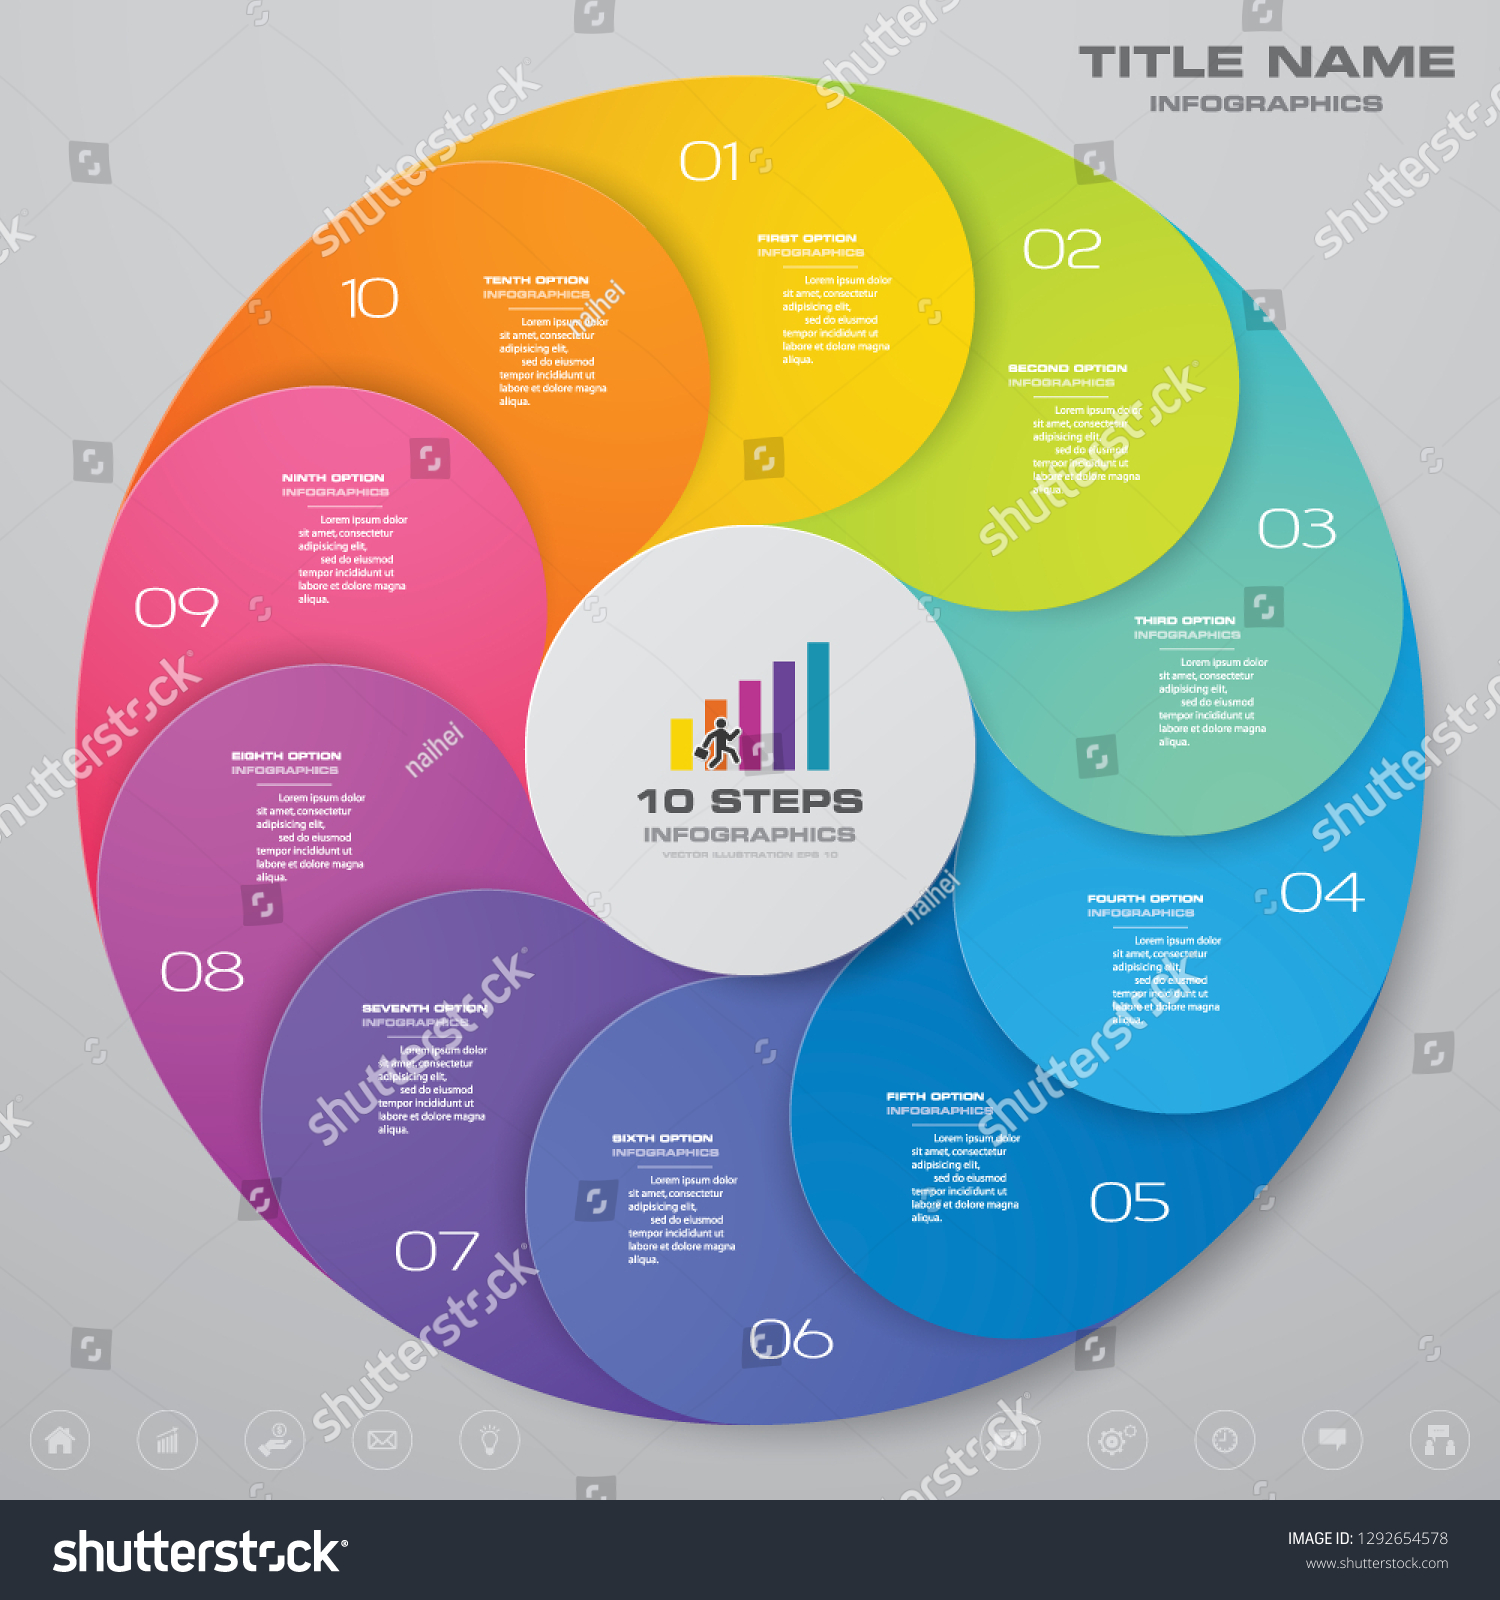 10 Steps Cycle Chart Infographics Element For Royalty Free Stock Vector 1292654578 4376